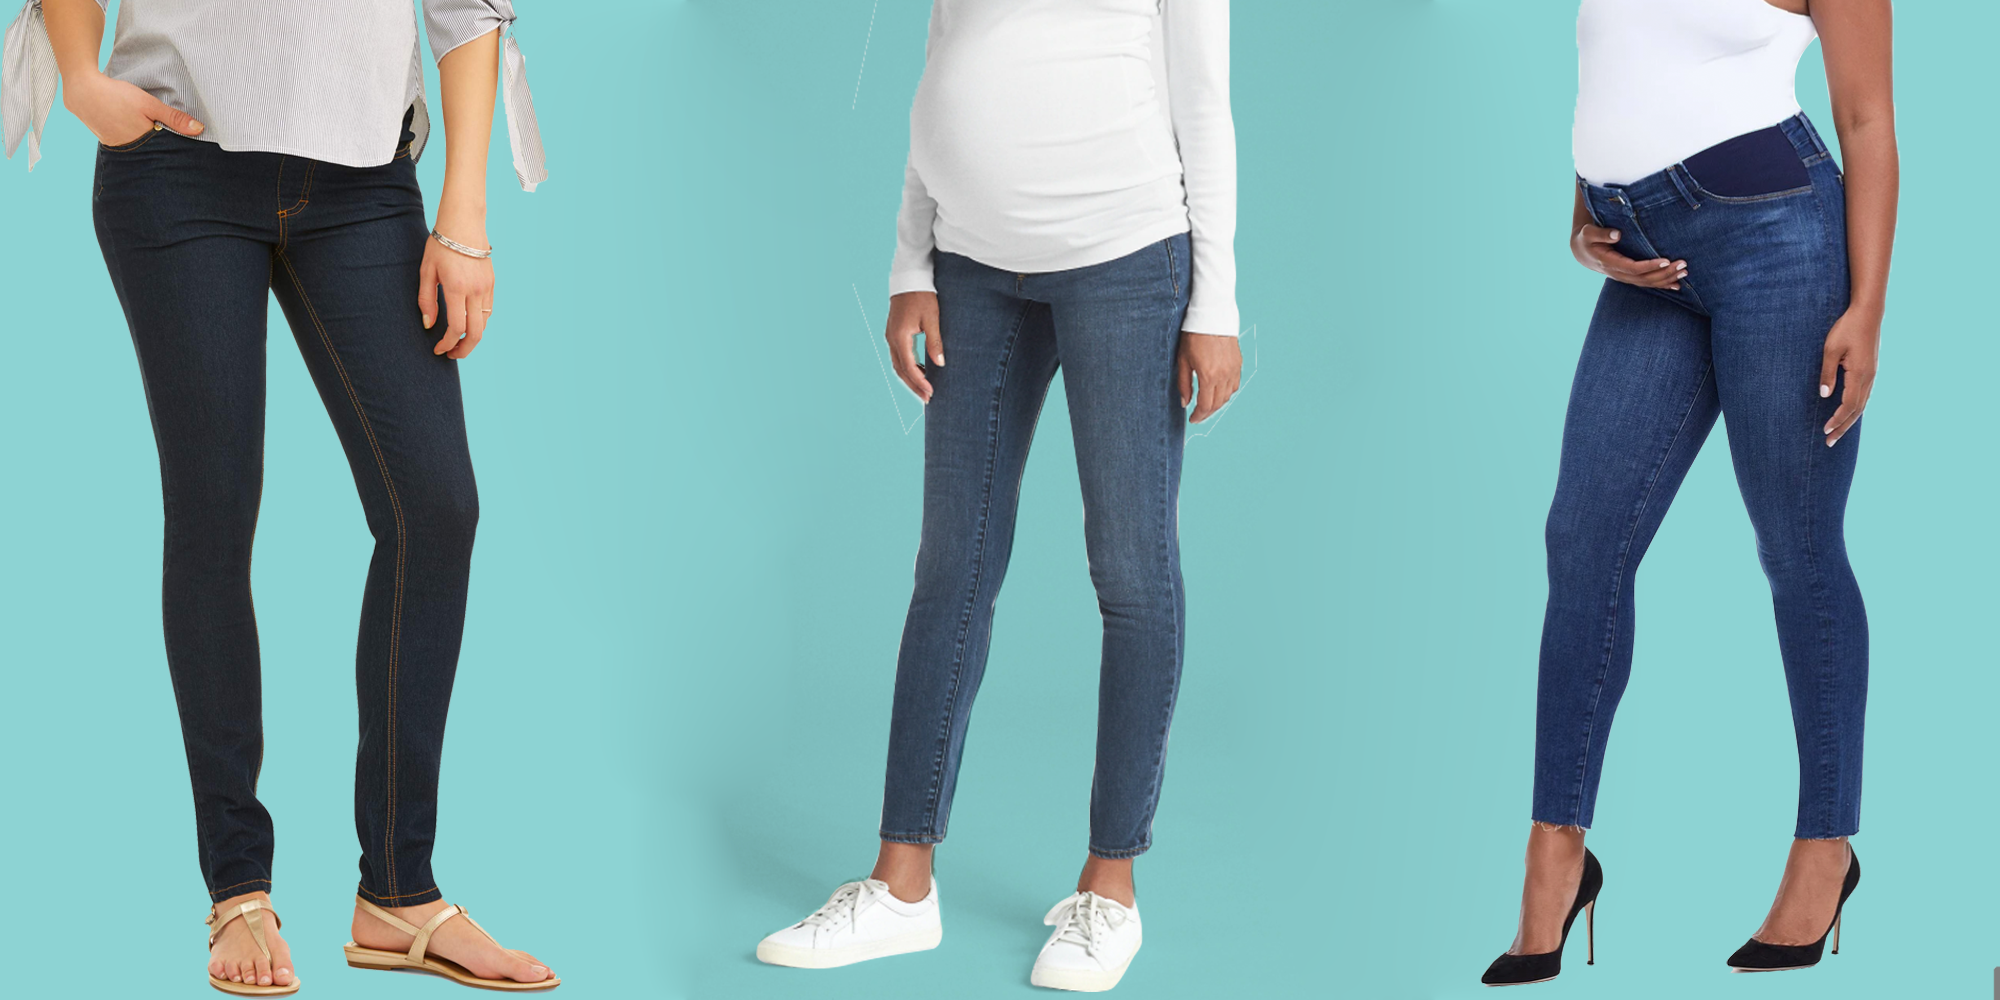 What Are Maternity Jeans? Why Do You Need Them?